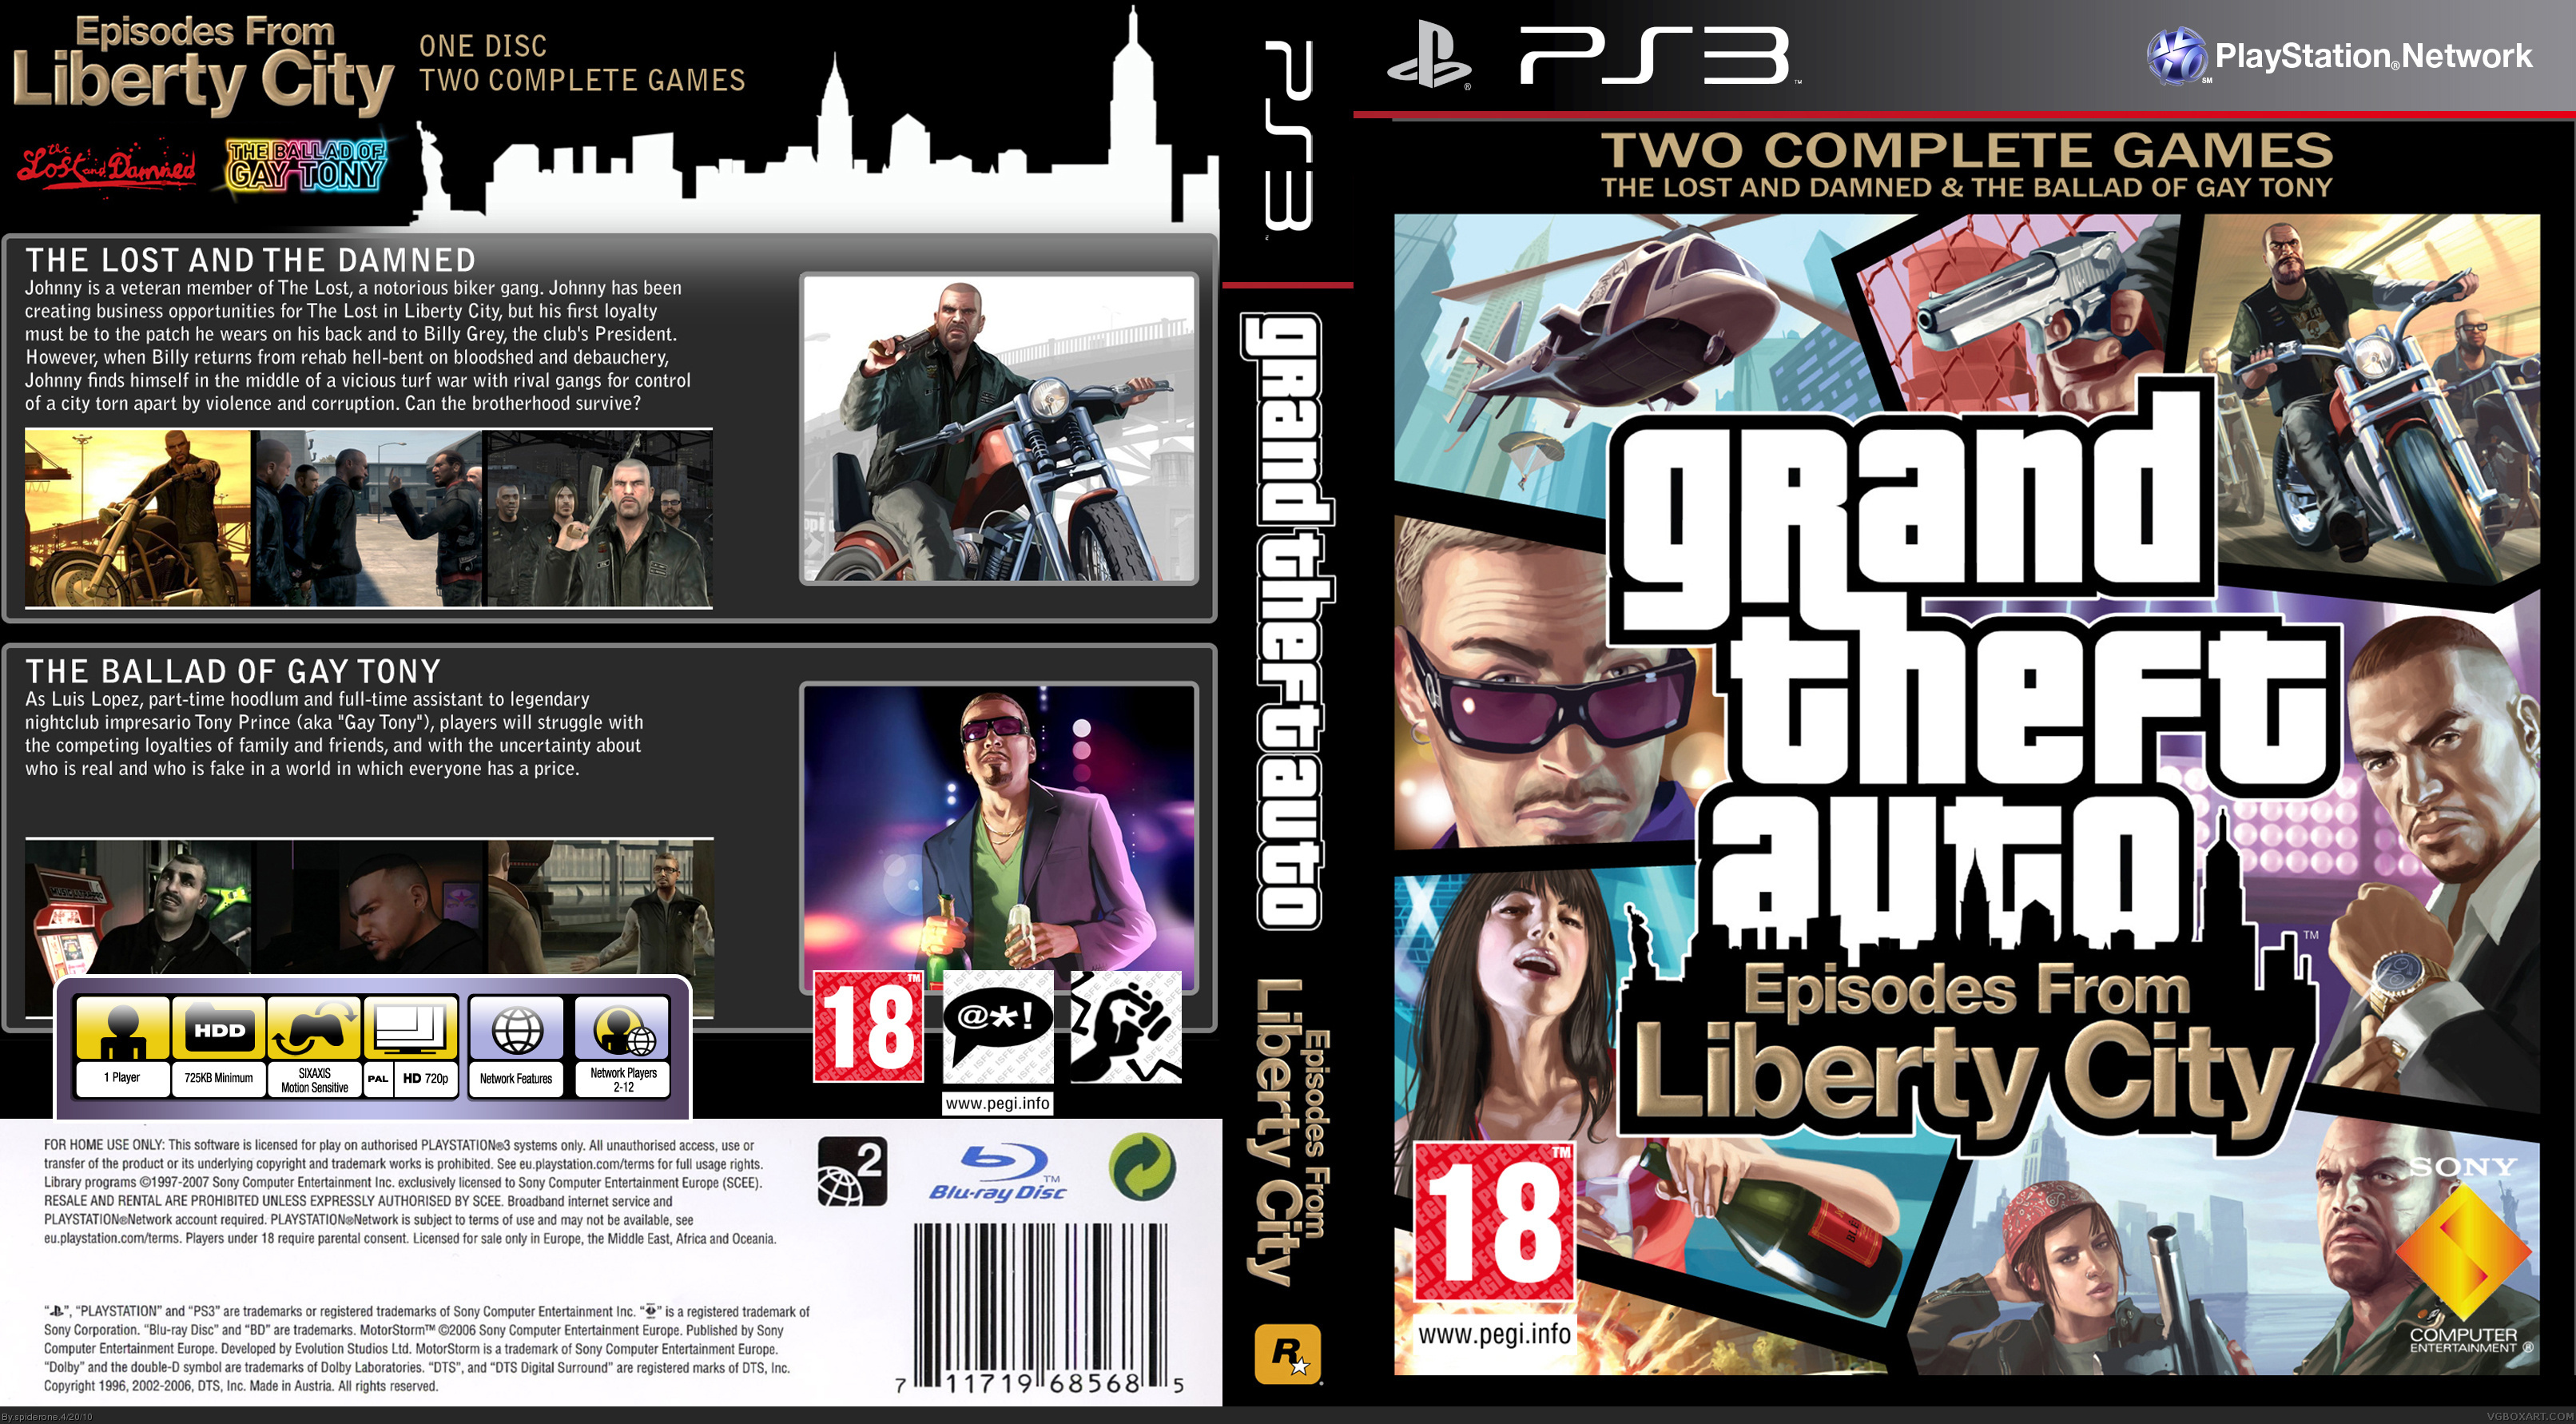 gta episodes from liberty city (ps3)